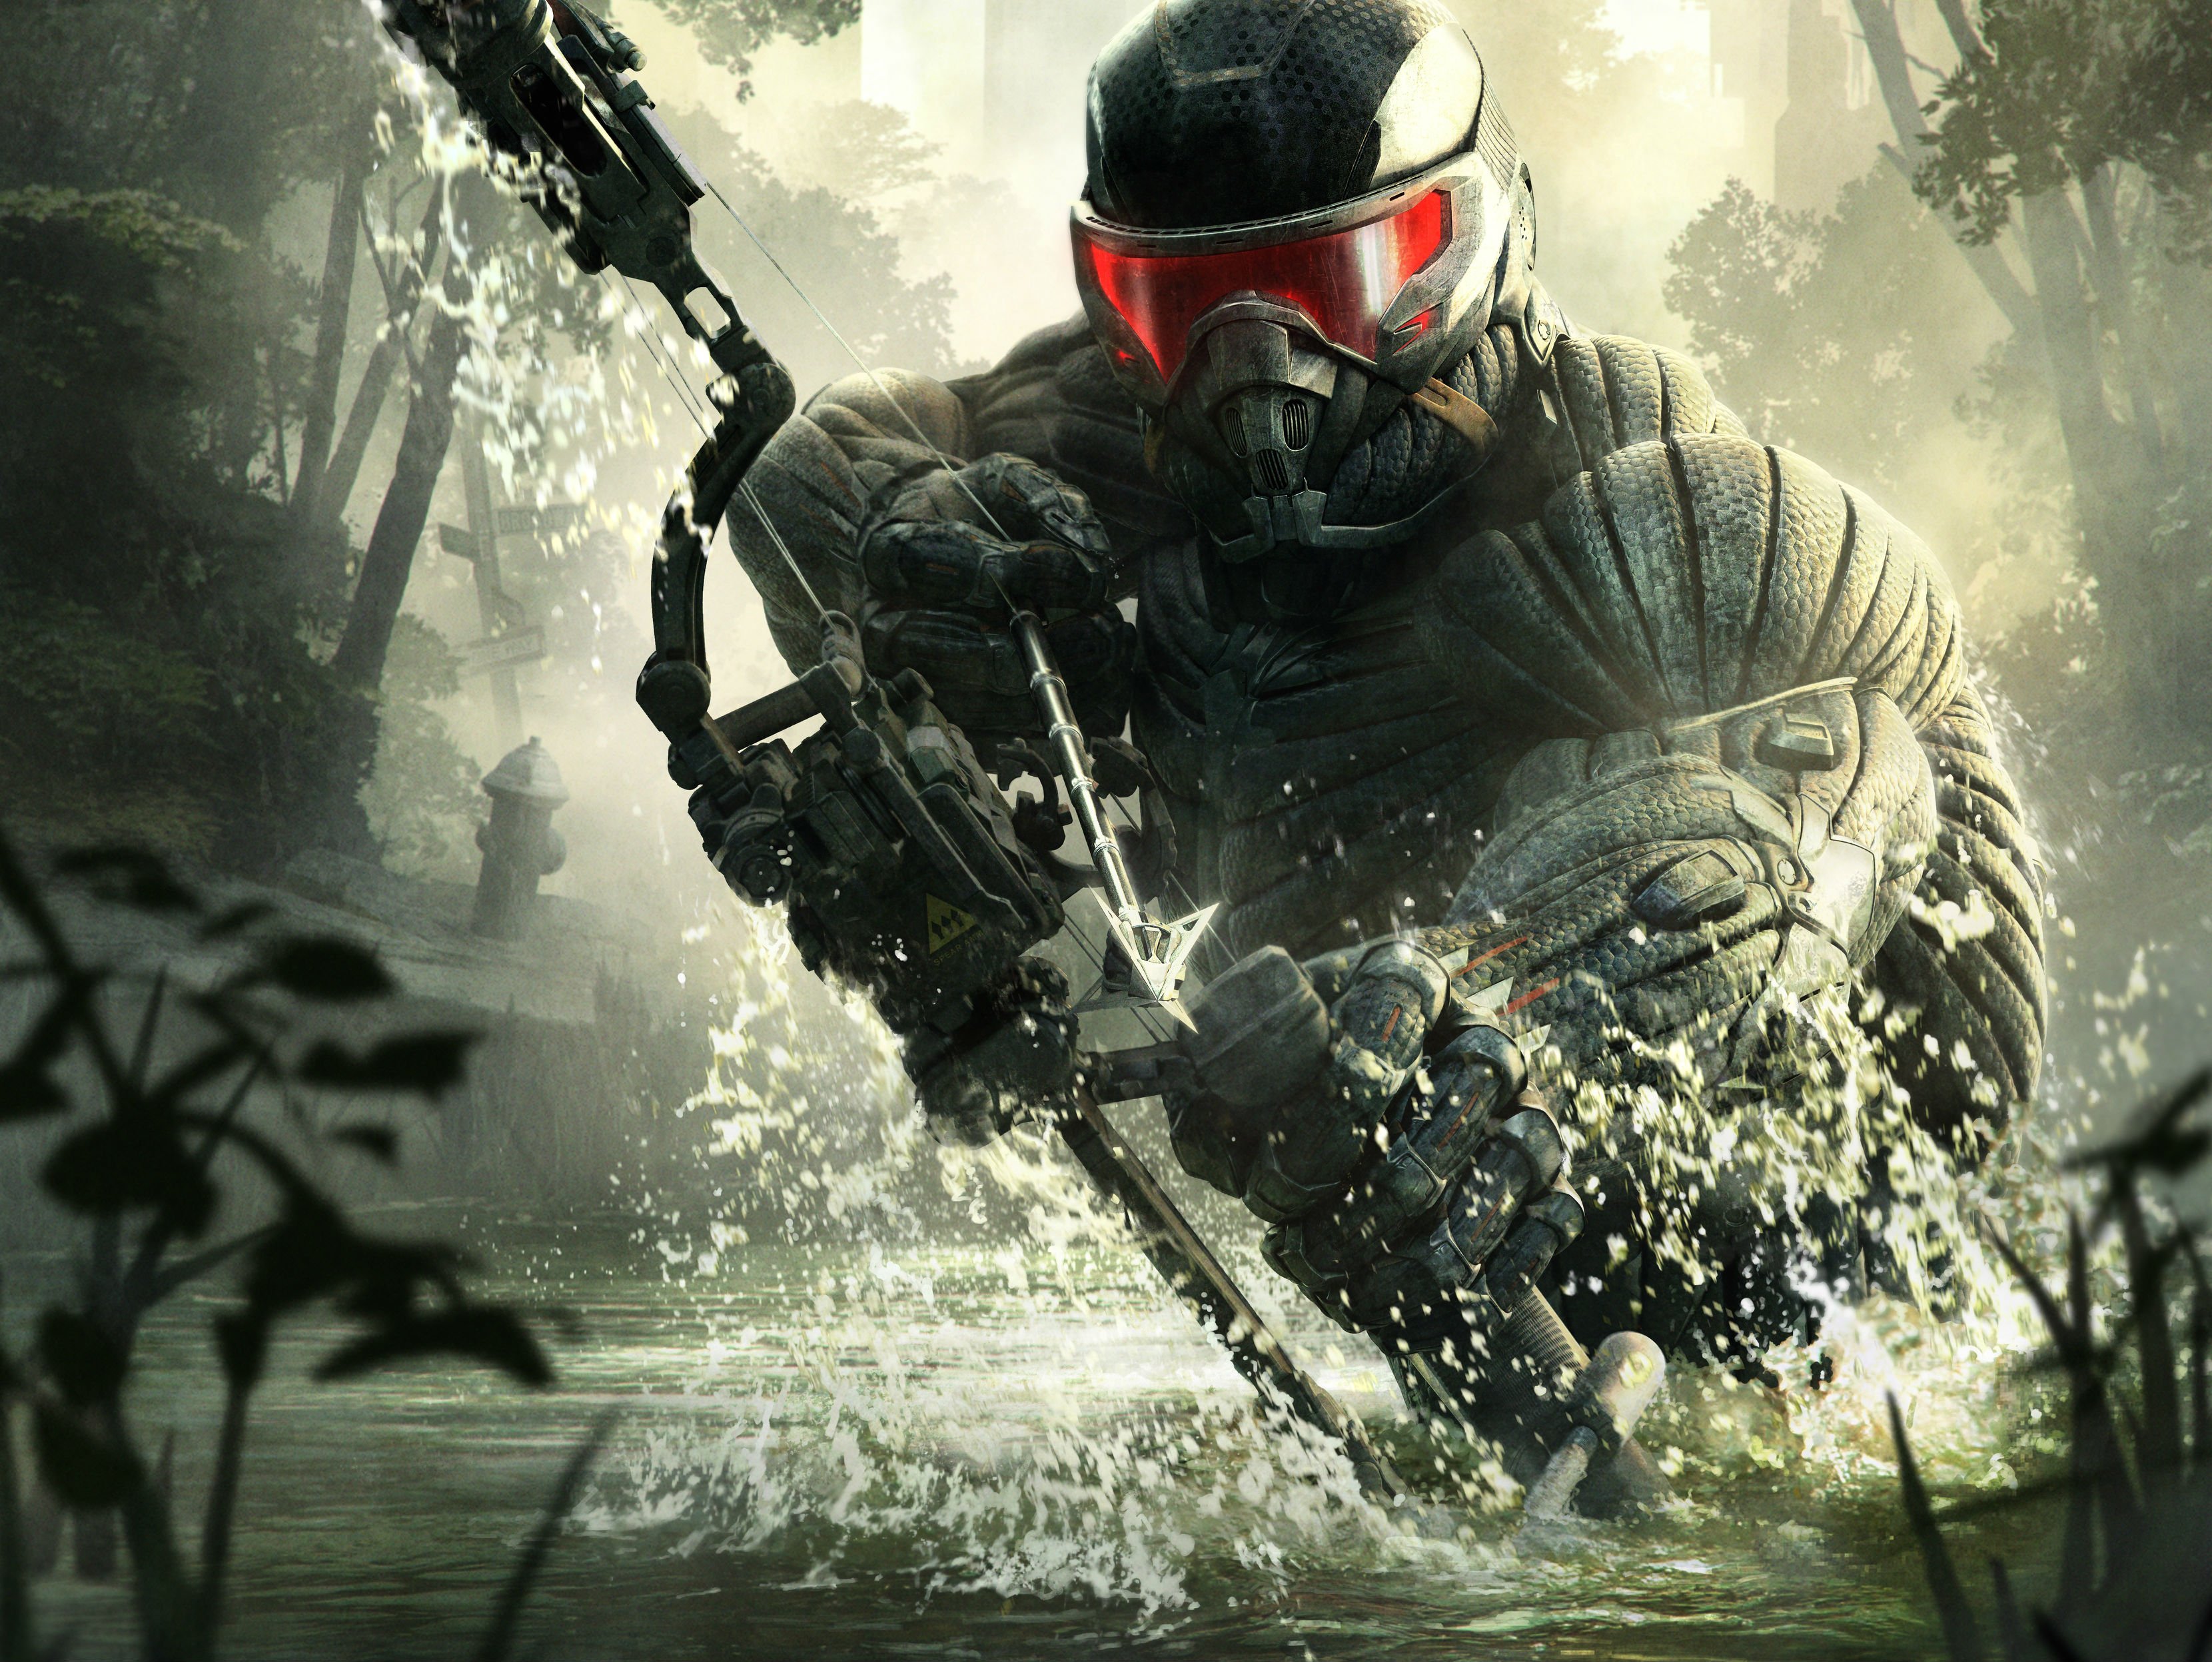 crysis, Sci fi, Fps, Shooter, Action, Fighing, Futuristic, Warrior, Military Wallpaper